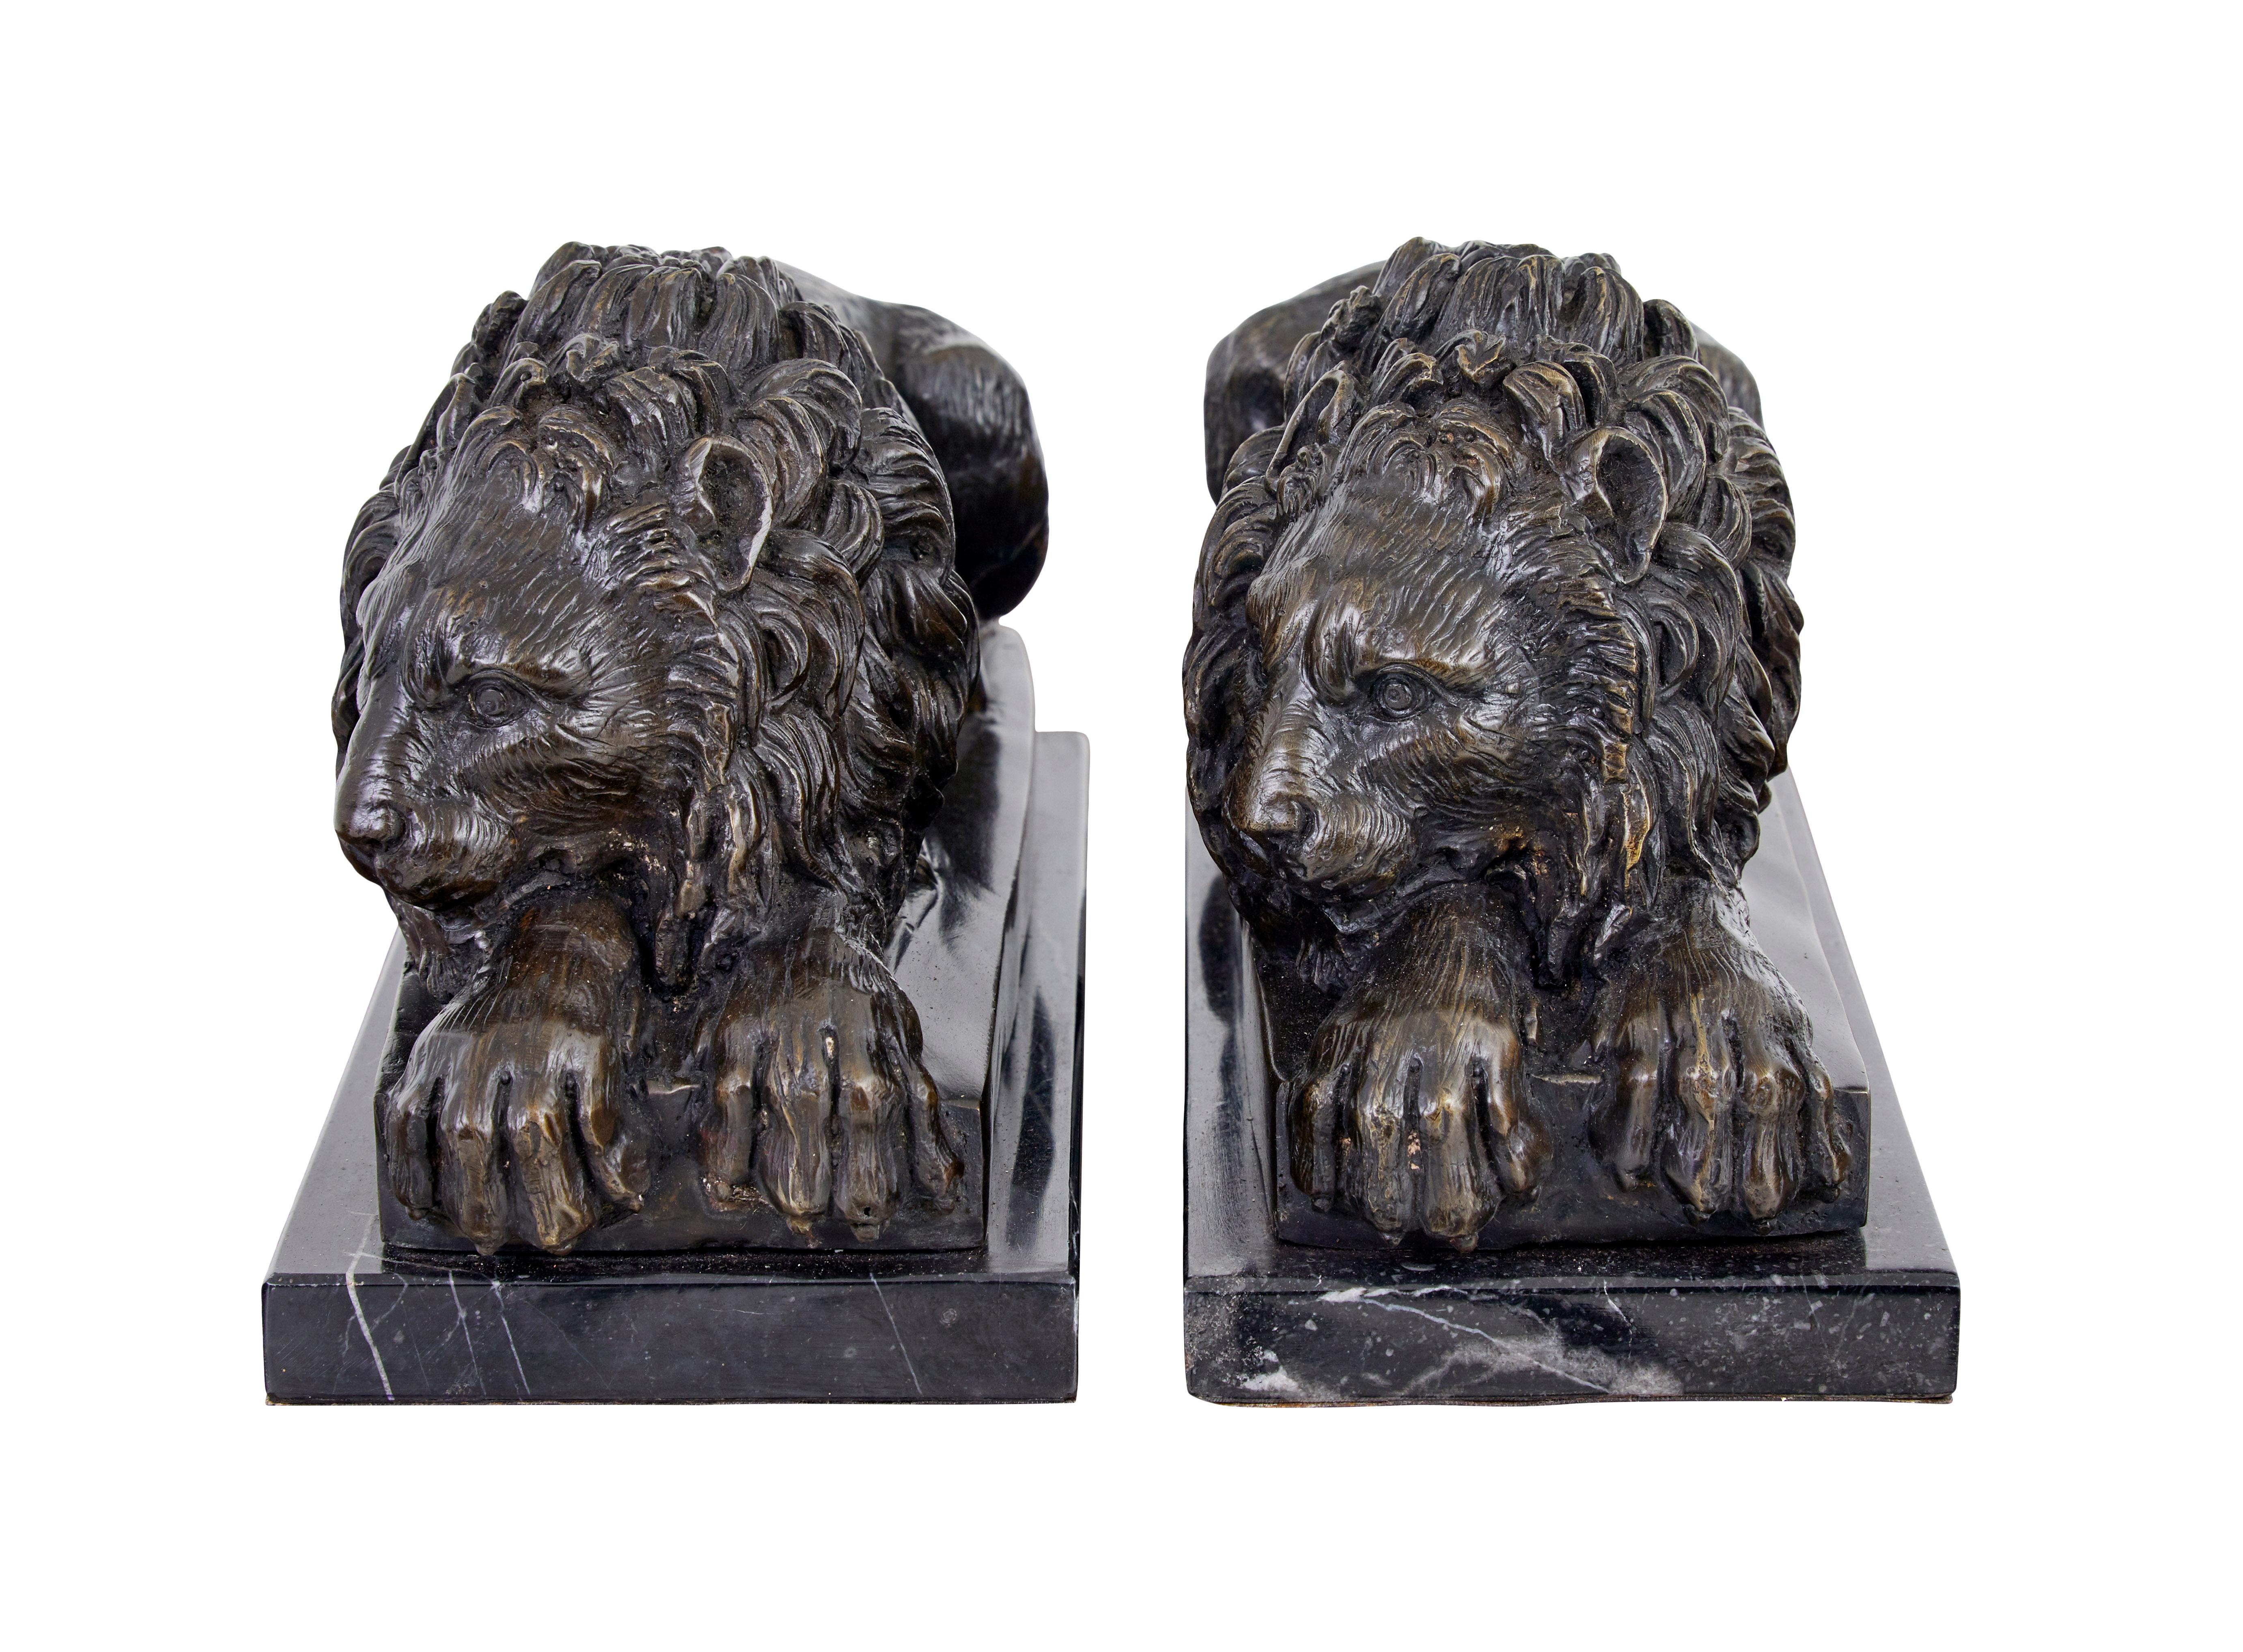 Pair of bronze and marble lion book ends.

Good quality reproduction of crouching bronze lions, mounted on black/grey marble plinths.

Ideal for keeping books upright or for other decorative uses.

Rich colour.